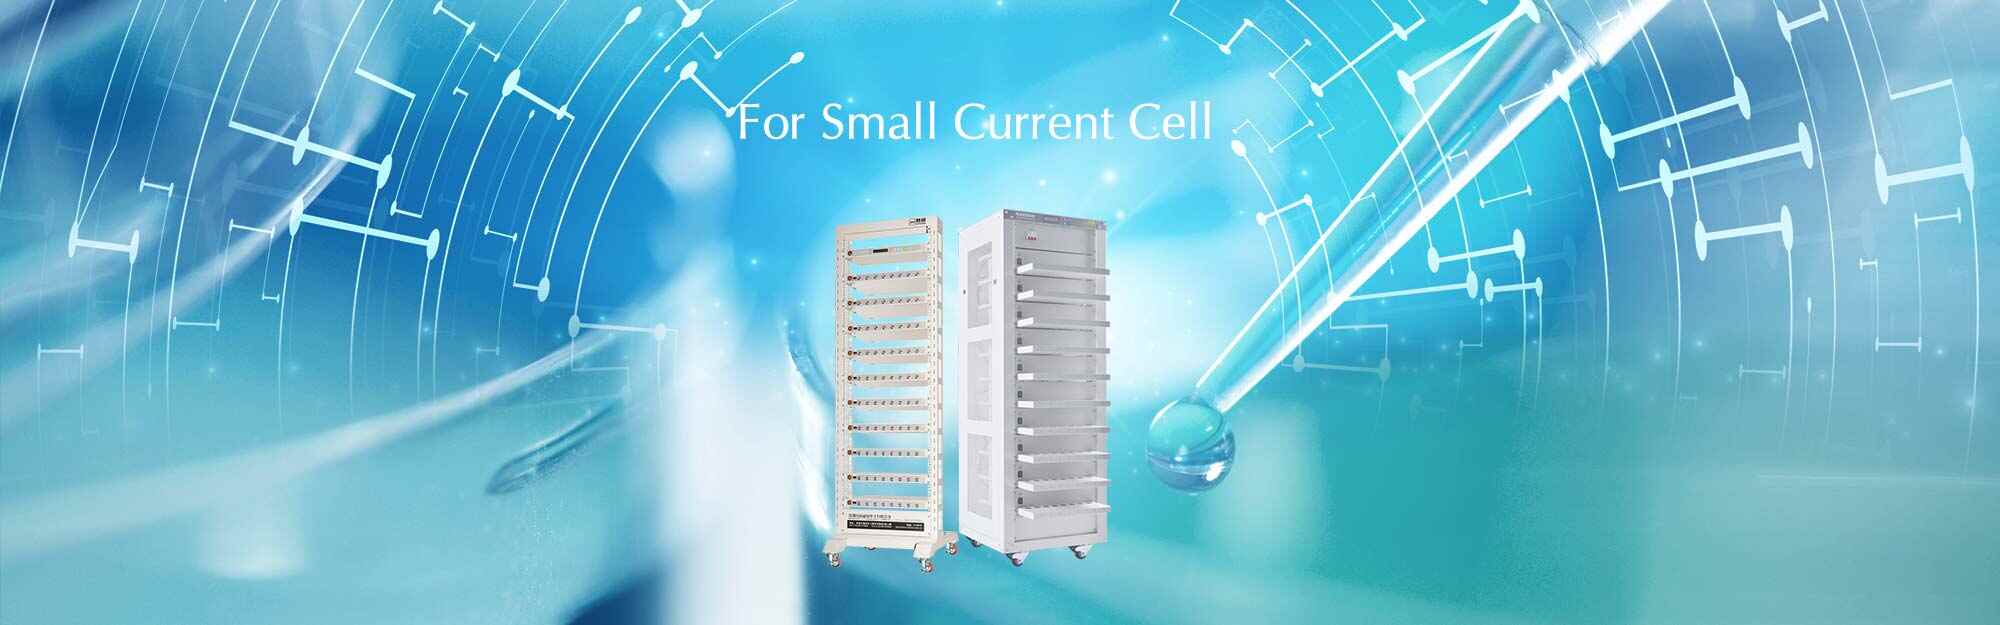 Small Current Cell Testing